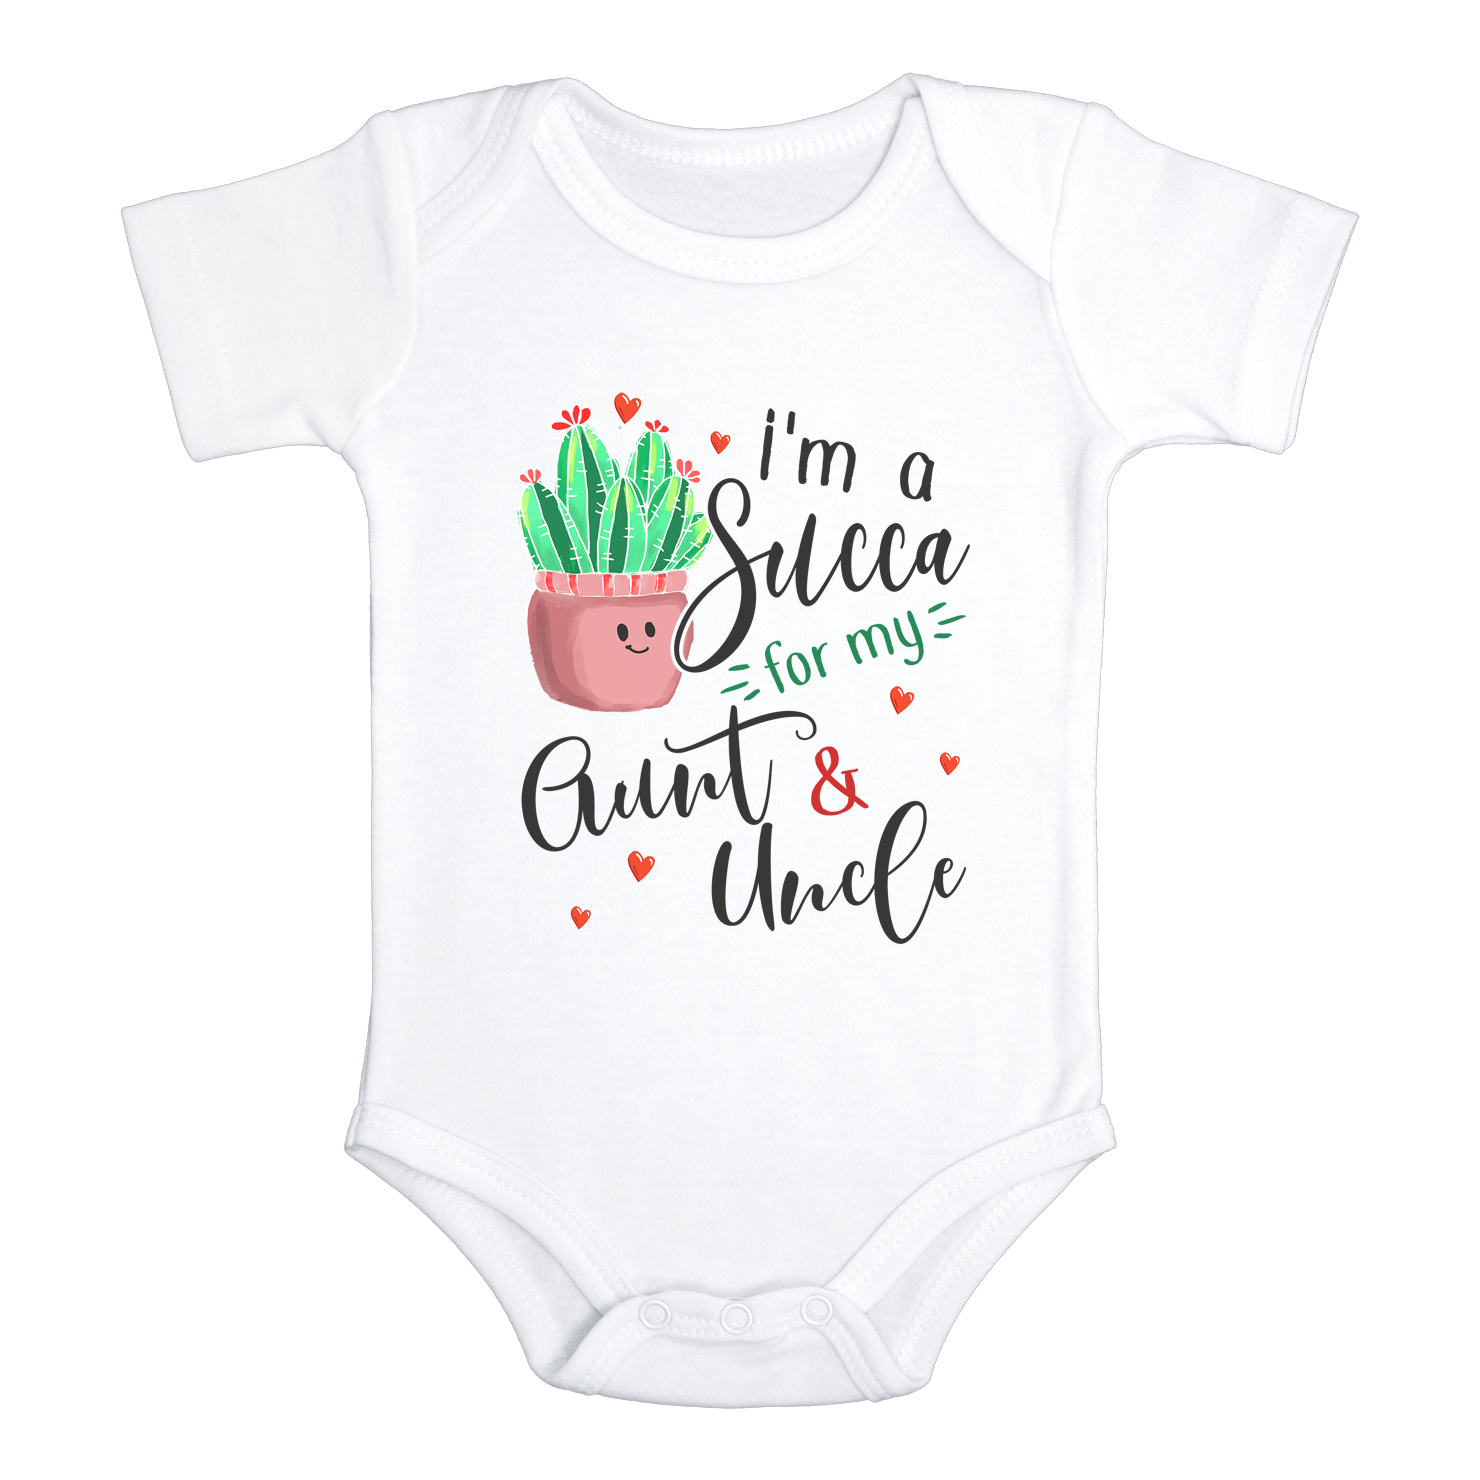 I'M A SUCCA FOR MY AUNT & UNCLE Funny Succulent Baby Bodysuit/Cactus Onesie White - HappyAddition